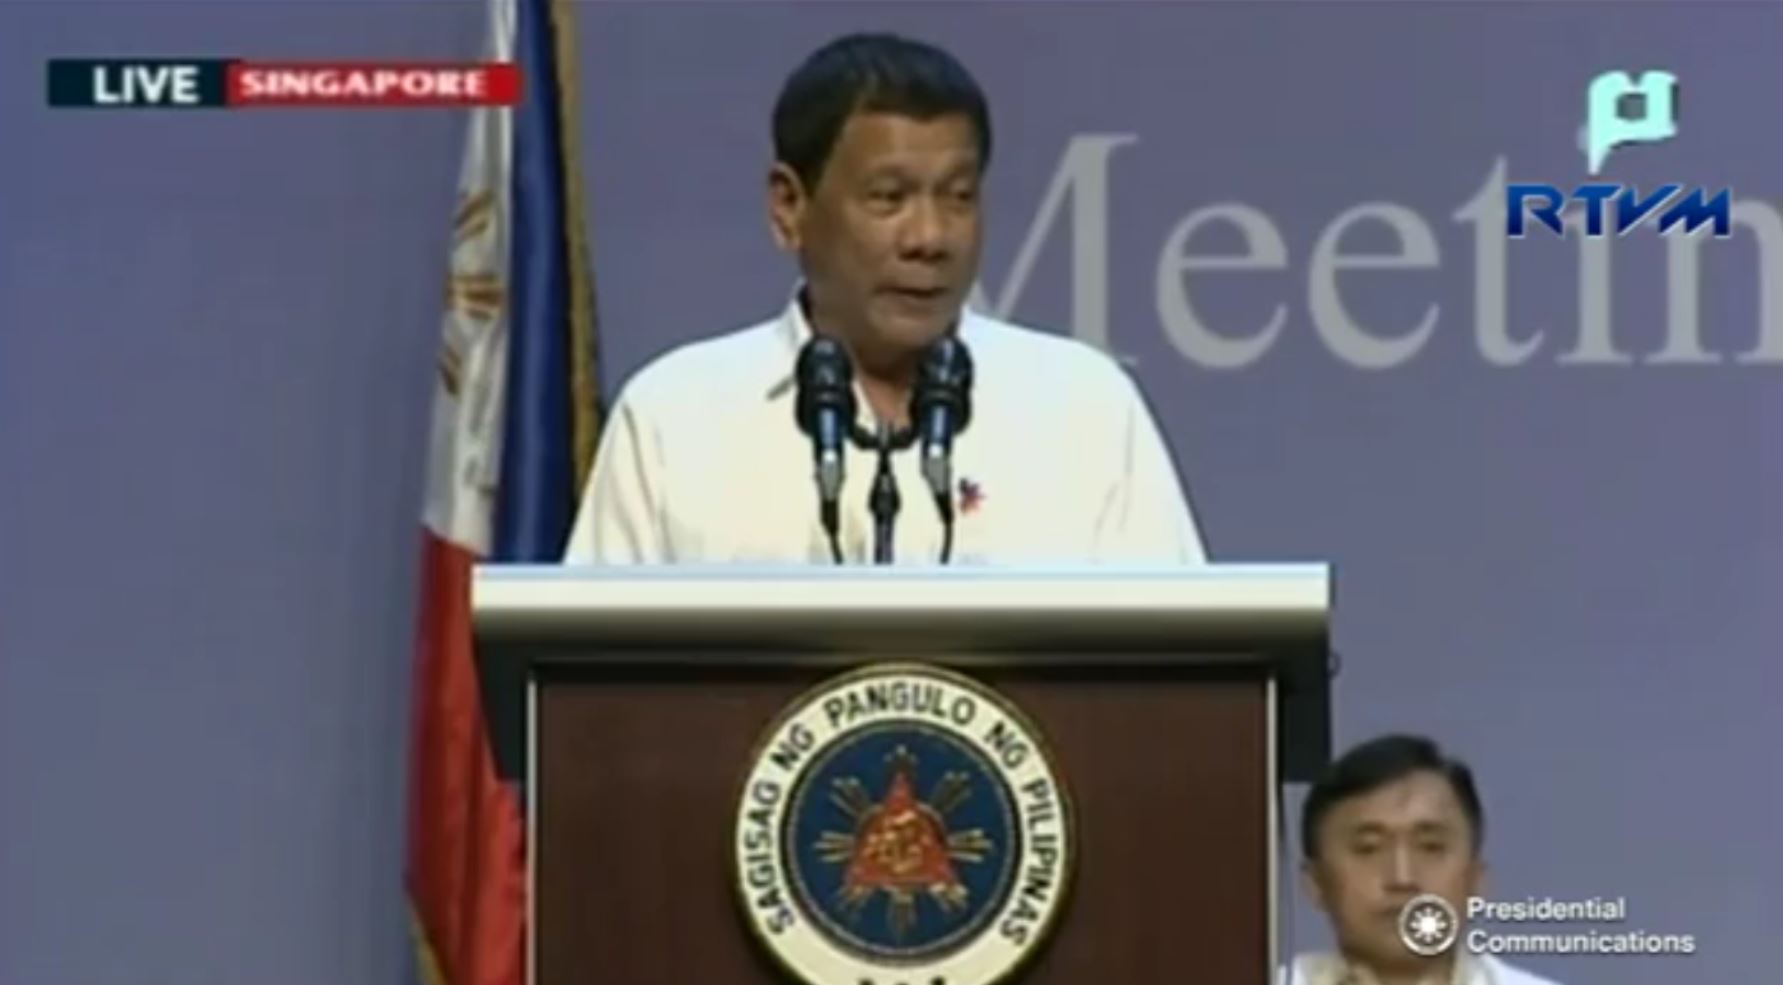 President Rodrigo Duterte addresses overseas Filipino workers in Singapore on Friday (December 16, 2016) on the last leg of his two-day state visit. (Photo grabbed from RTVM video)